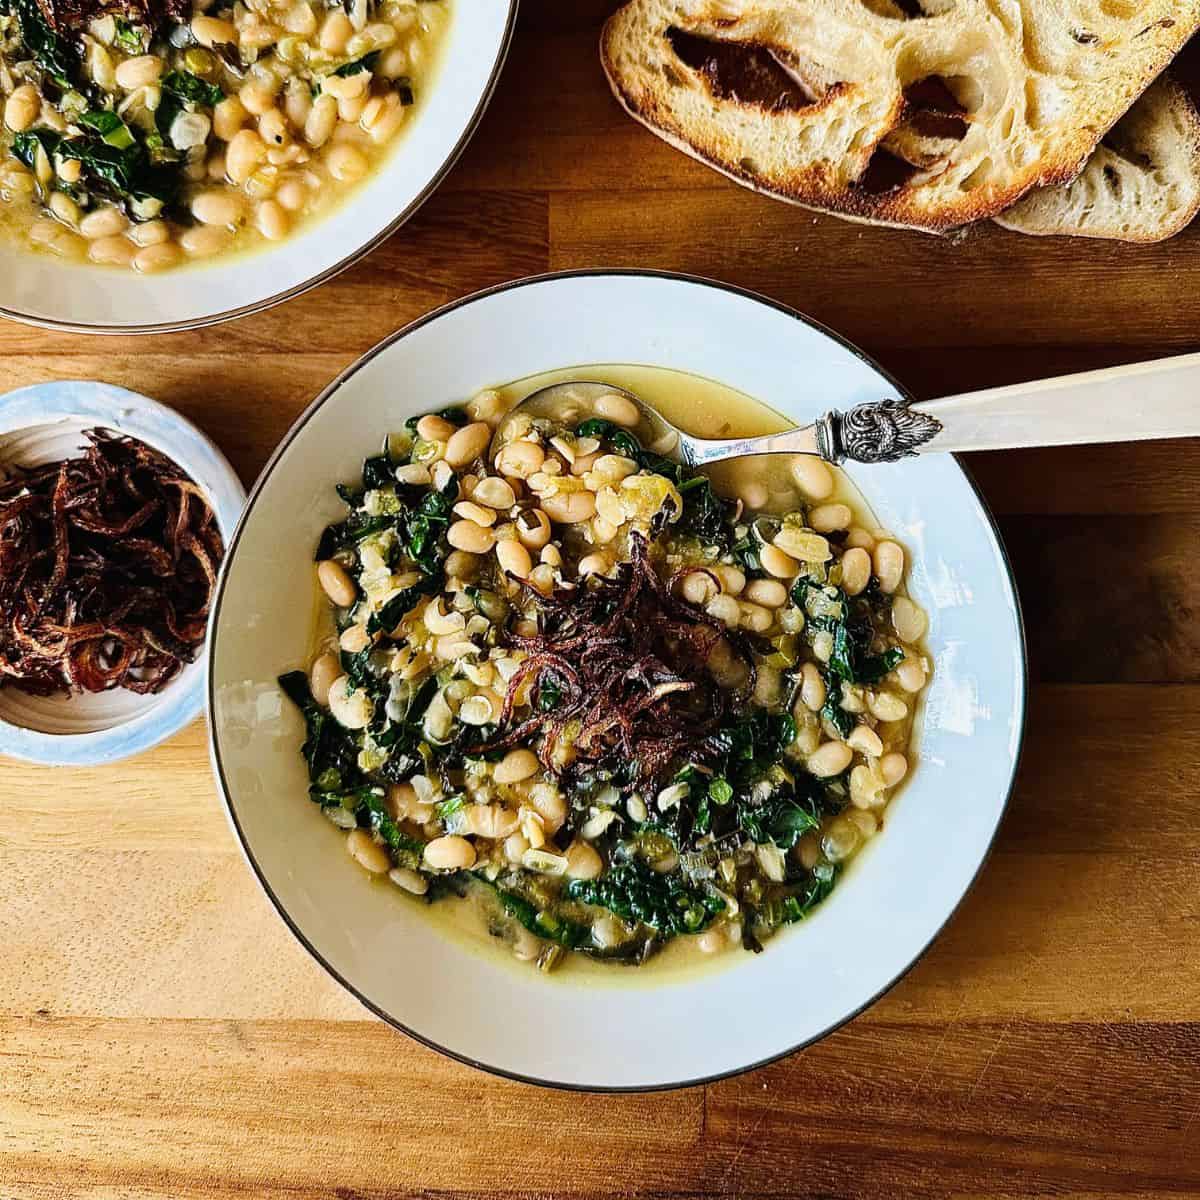 A serving bowl containing haricot bean stew, cavolo nero and a crispy fried onion garnish.